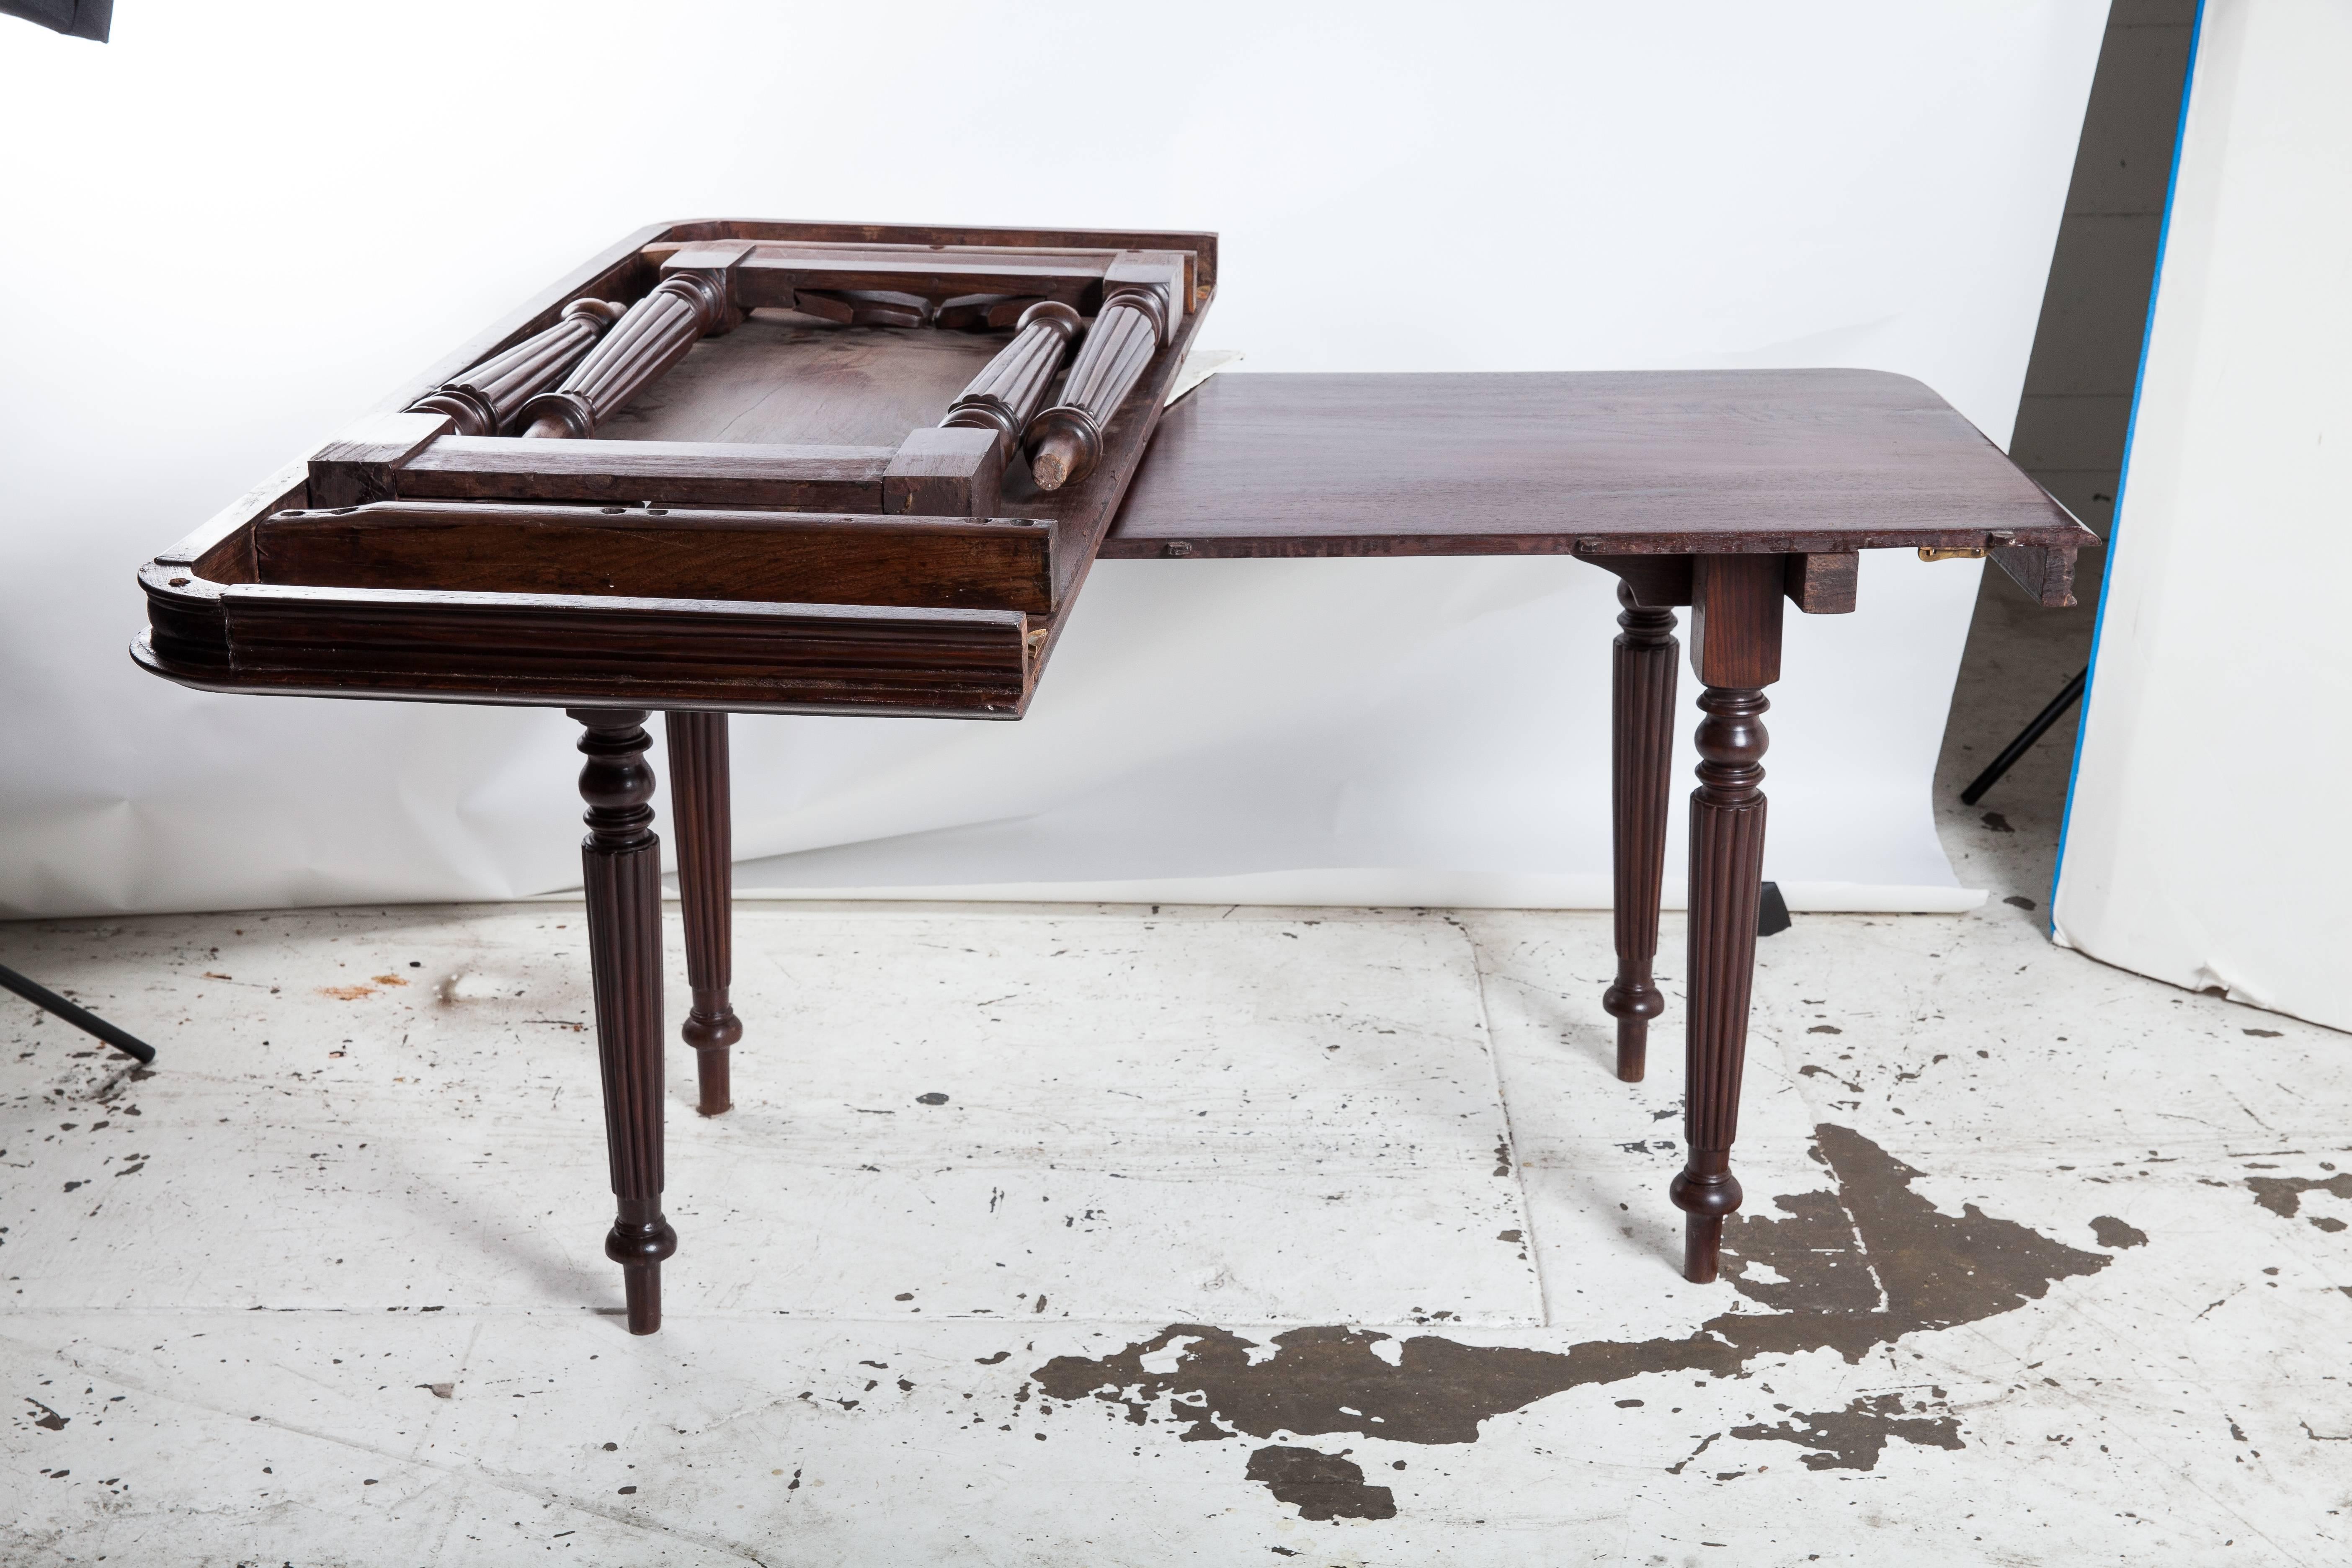 British Campaign solid rosewood table in two halves. Tables join together to form a single table or each half can be used as a console table. Turned, tapered legs. In true Campaign style, the table folds flat for easy transport.
 